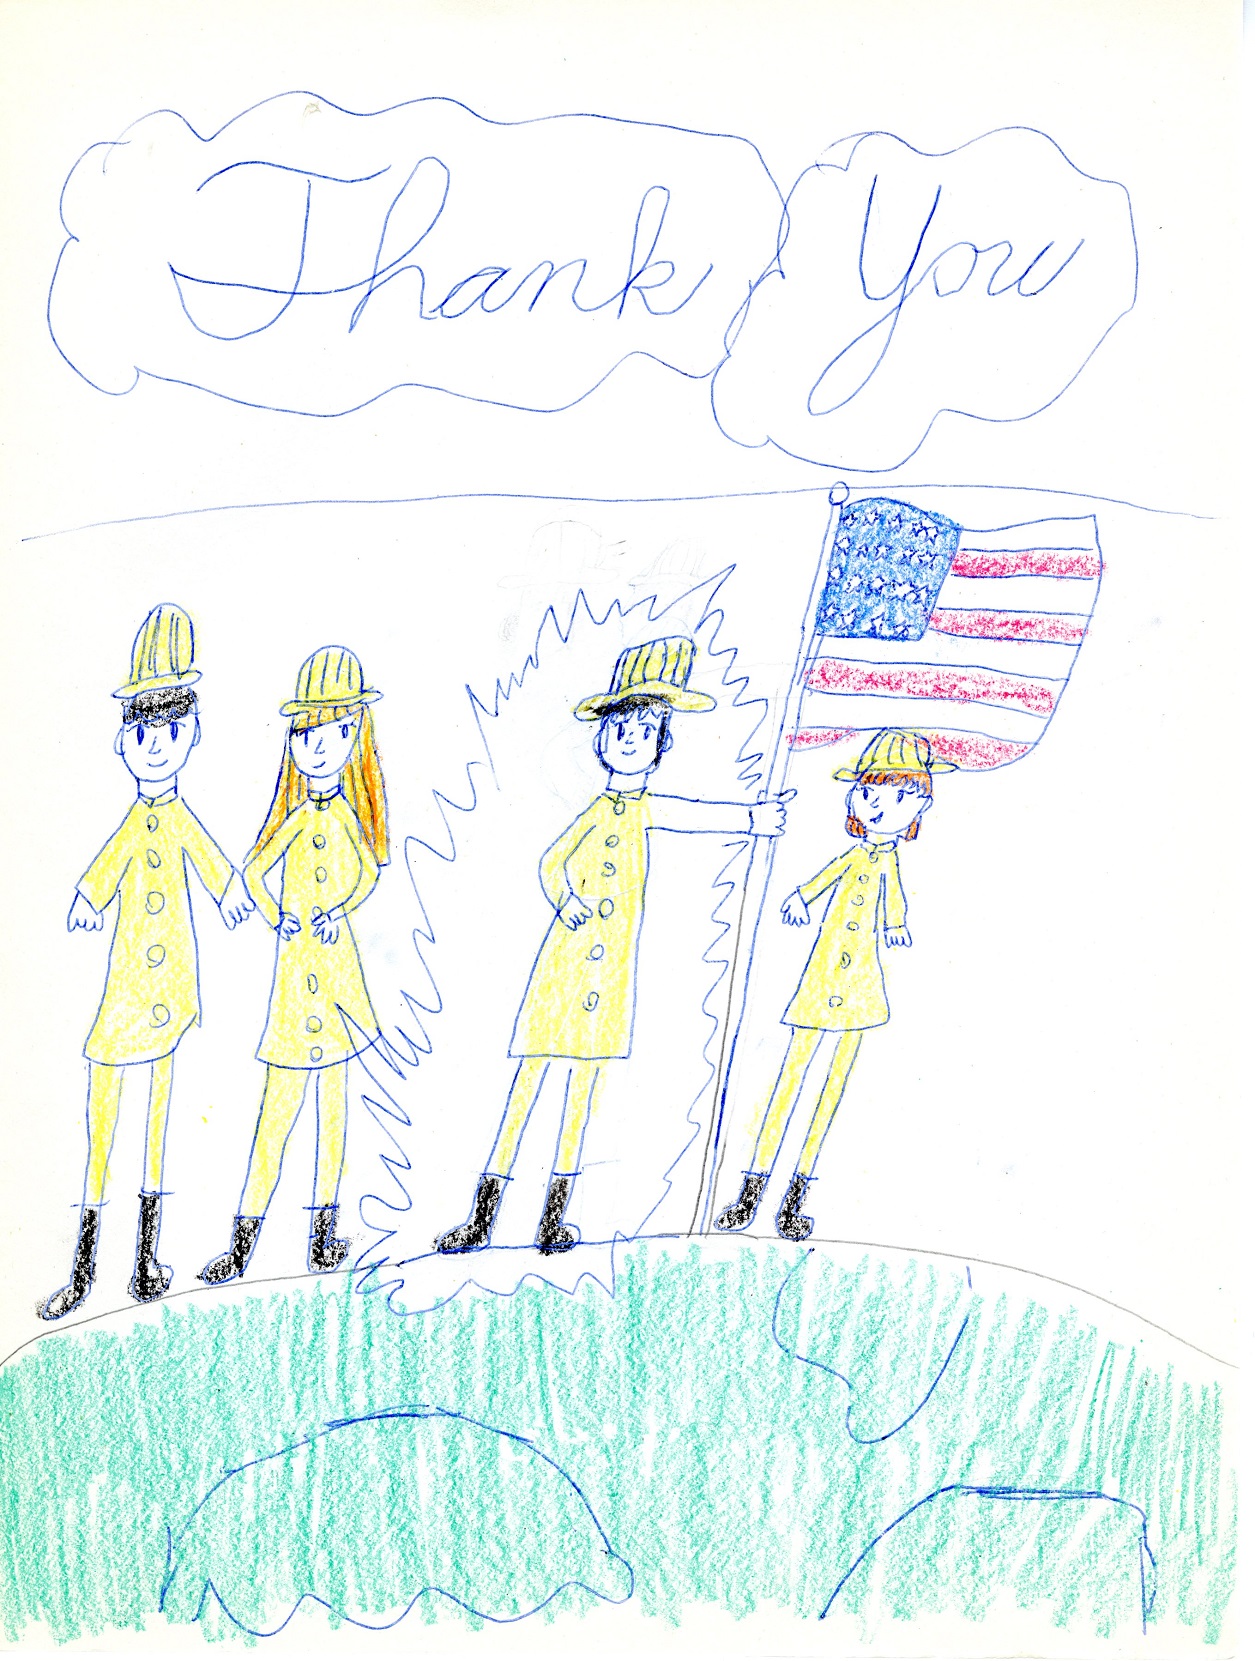 Children's drawing of four first responders in yellow uniforms standing in a row alongside an American flag planted into the ground. Above the drawing, the words "Thank You" are written in cursive lettering.